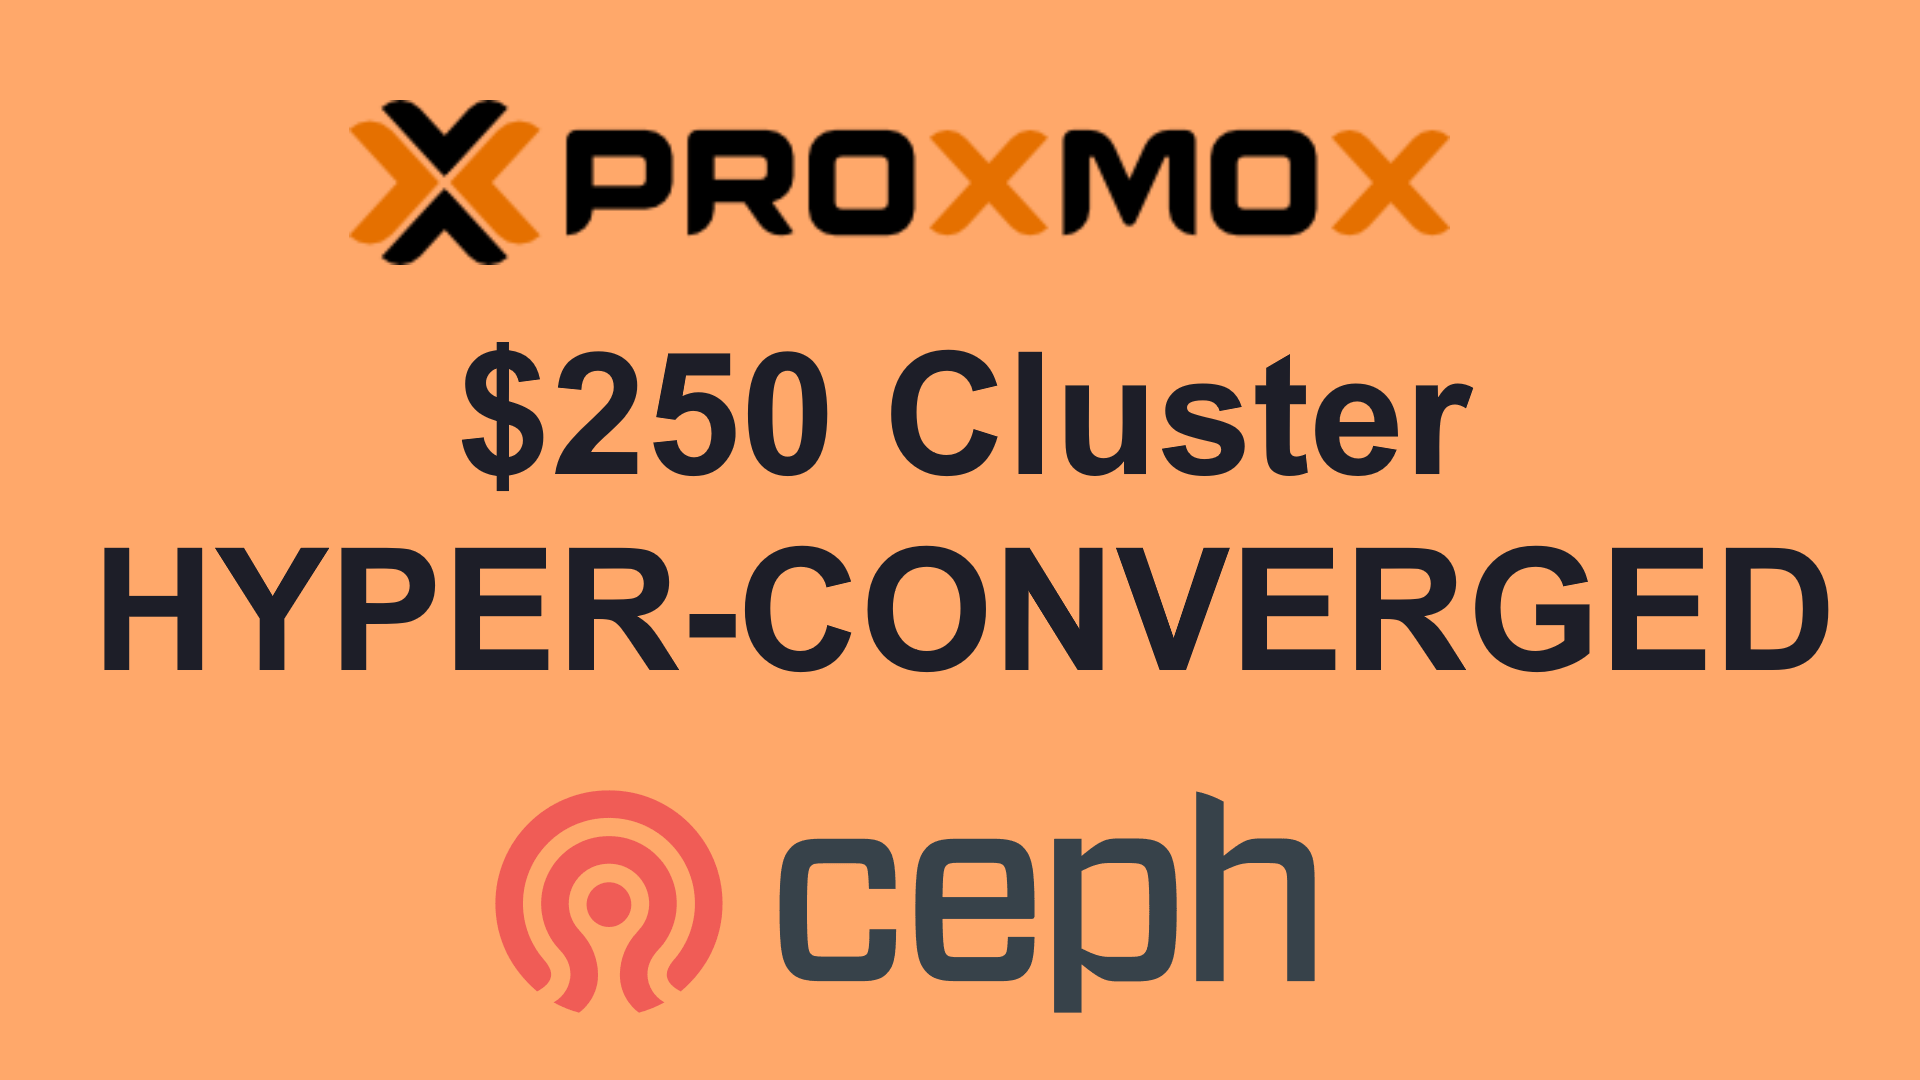 Making the $250 Proxmox HA Cluster Hyperconverged